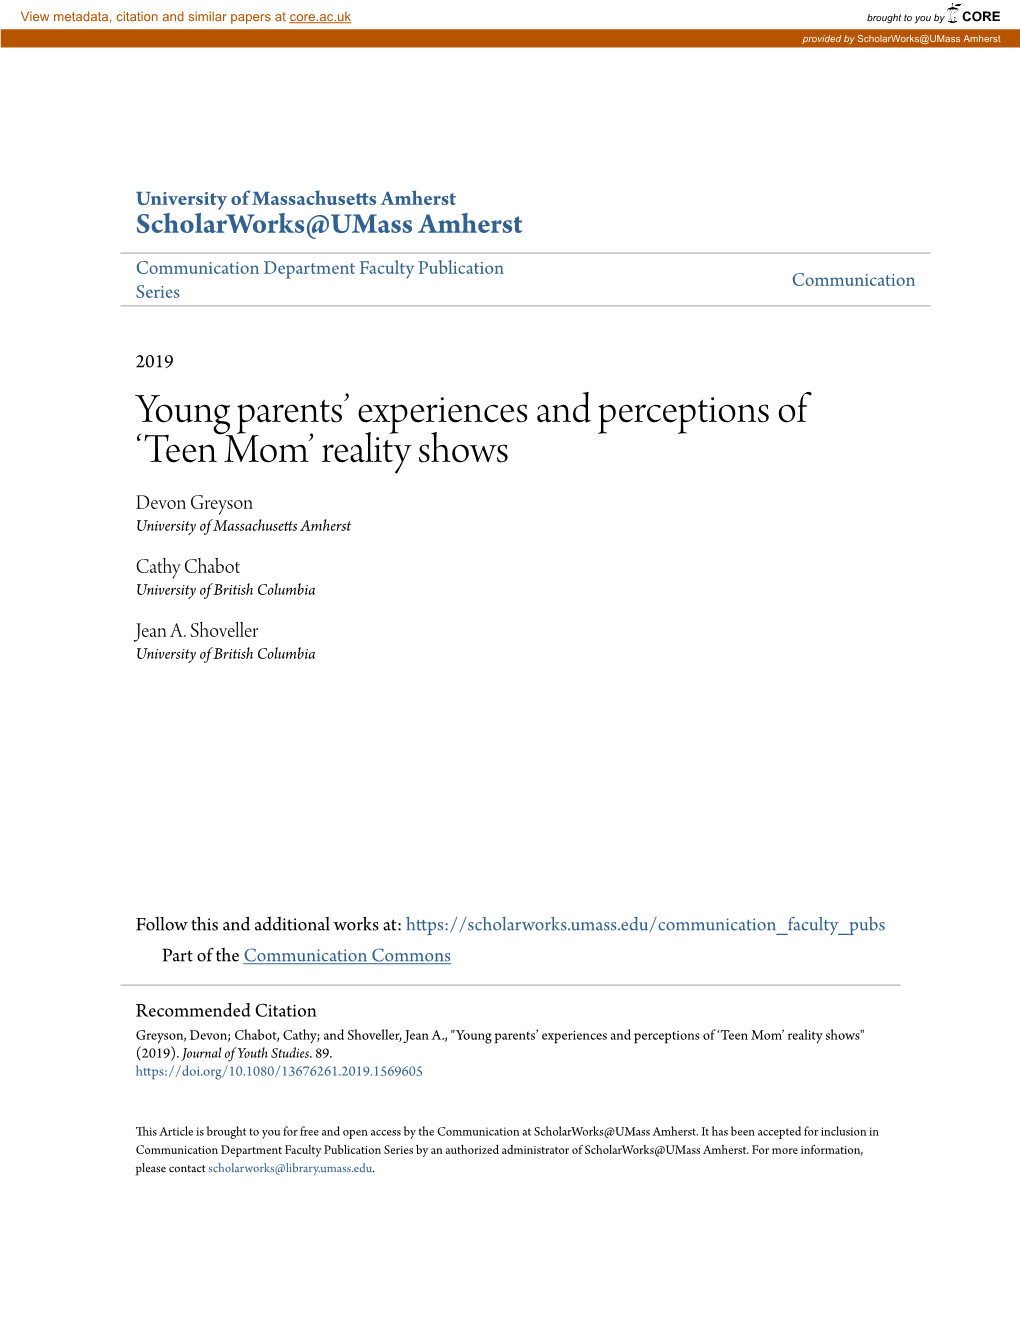 Young Parents' Experiences and Perceptions of 'Teen Mom' Reality Shows